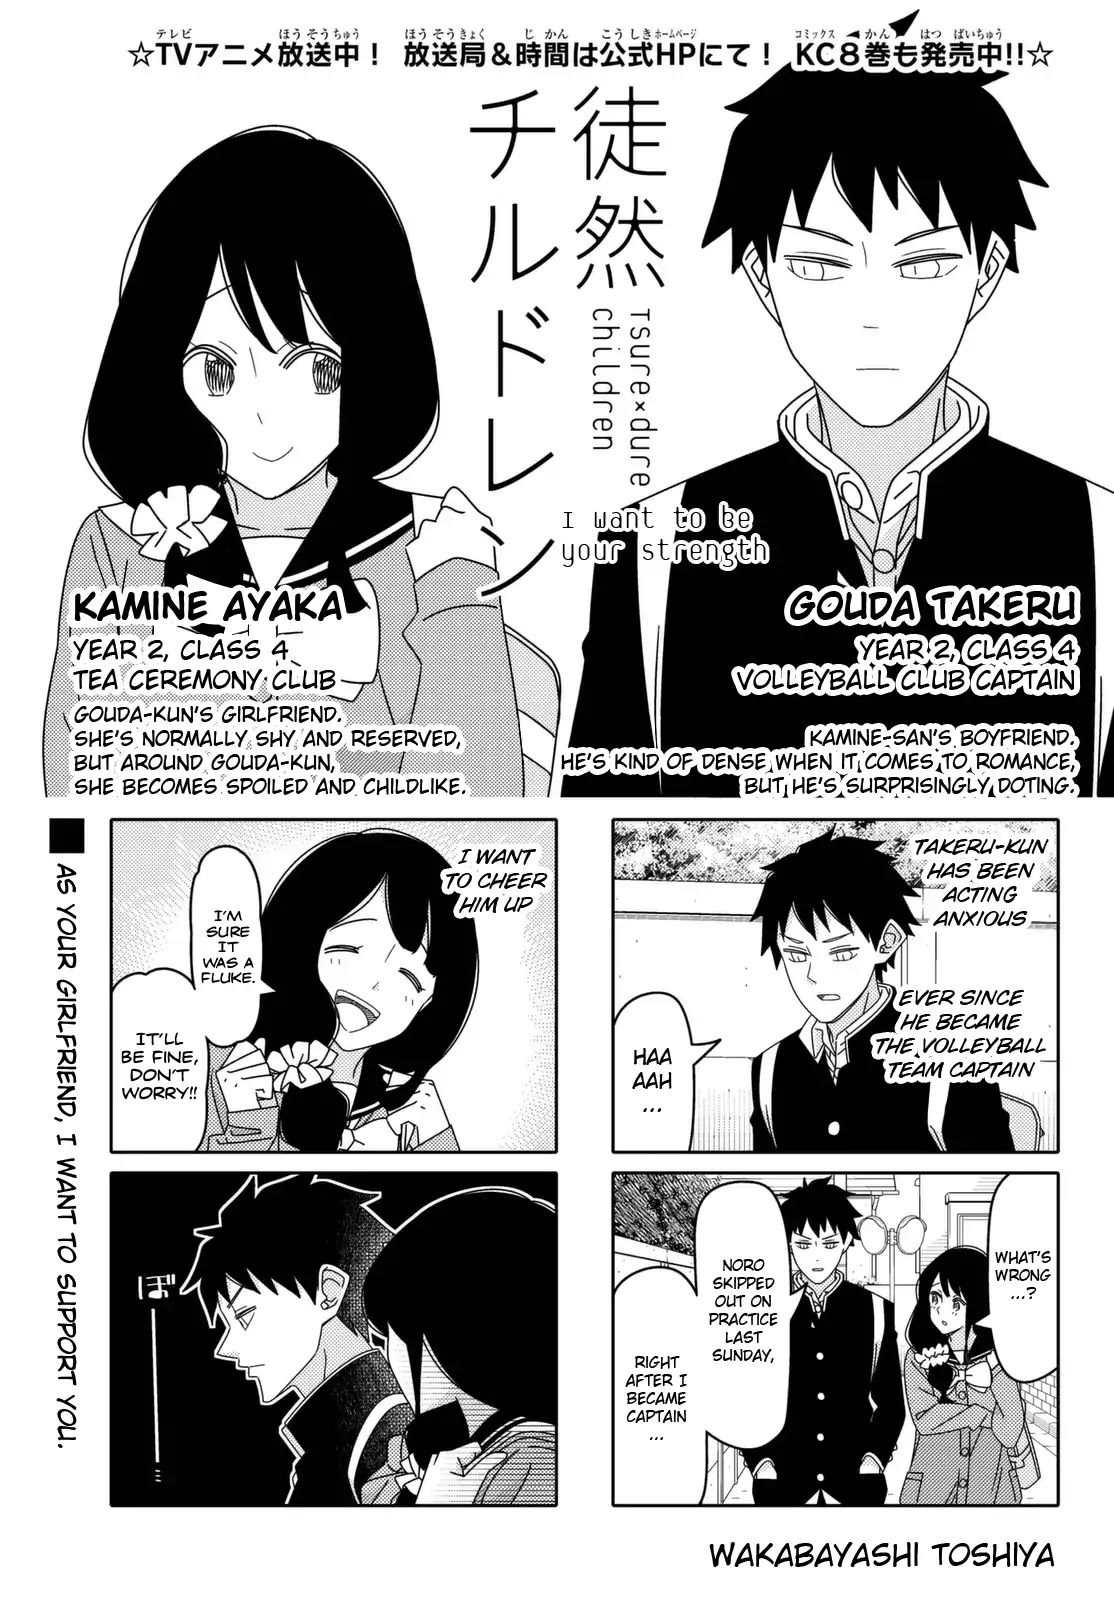 Tsurezure Children Chapter 153: I Want To Be Your Strength (Kamine/gouda) - Picture 1